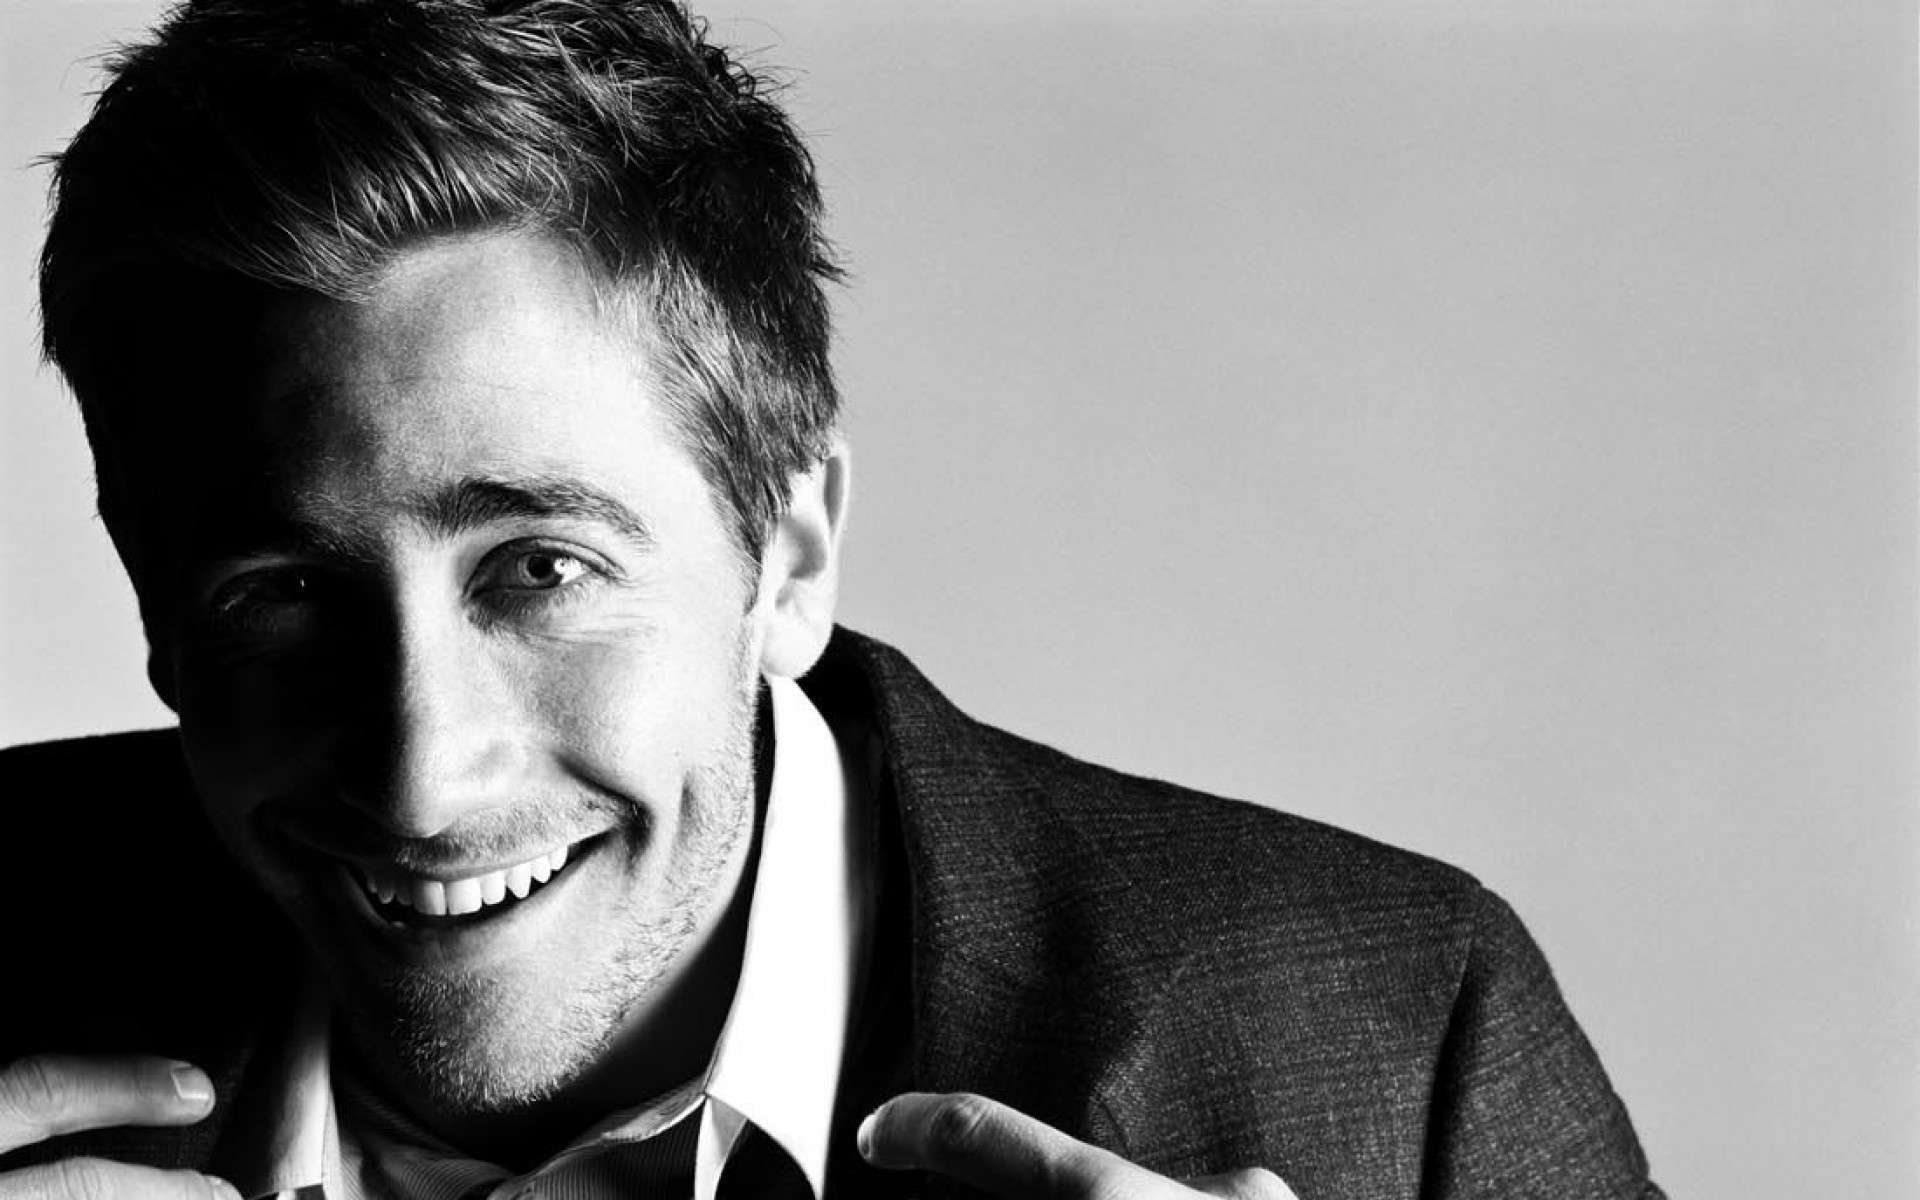 Jake Gyllenhaal Wallpaper Image Photo Picture Background